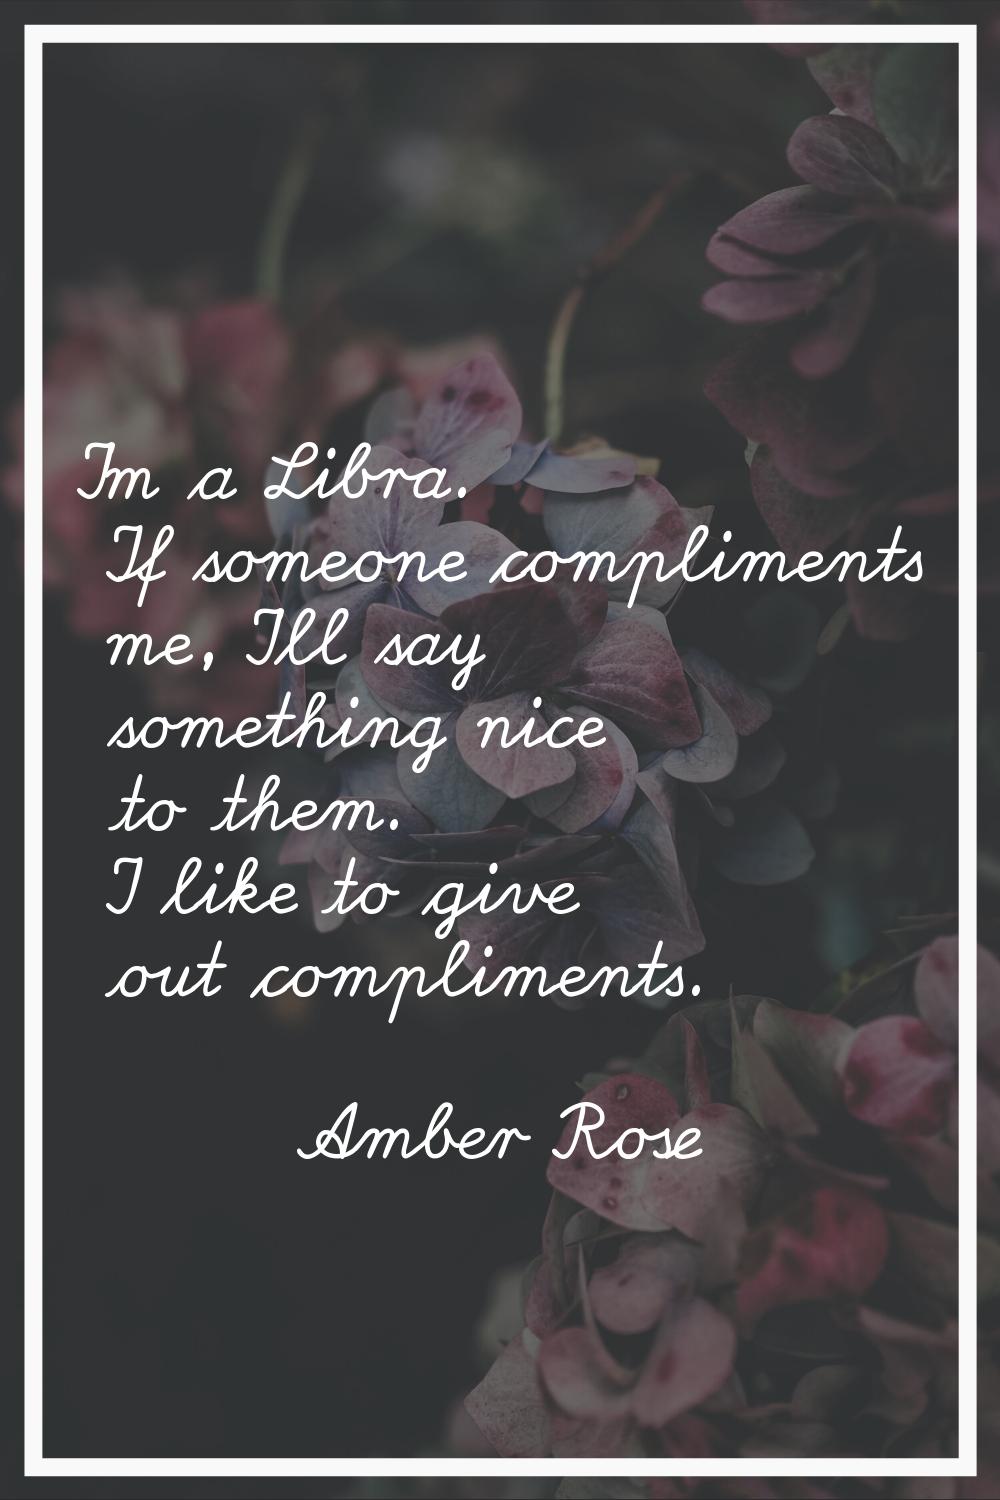 I'm a Libra. If someone compliments me, I'll say something nice to them. I like to give out complim